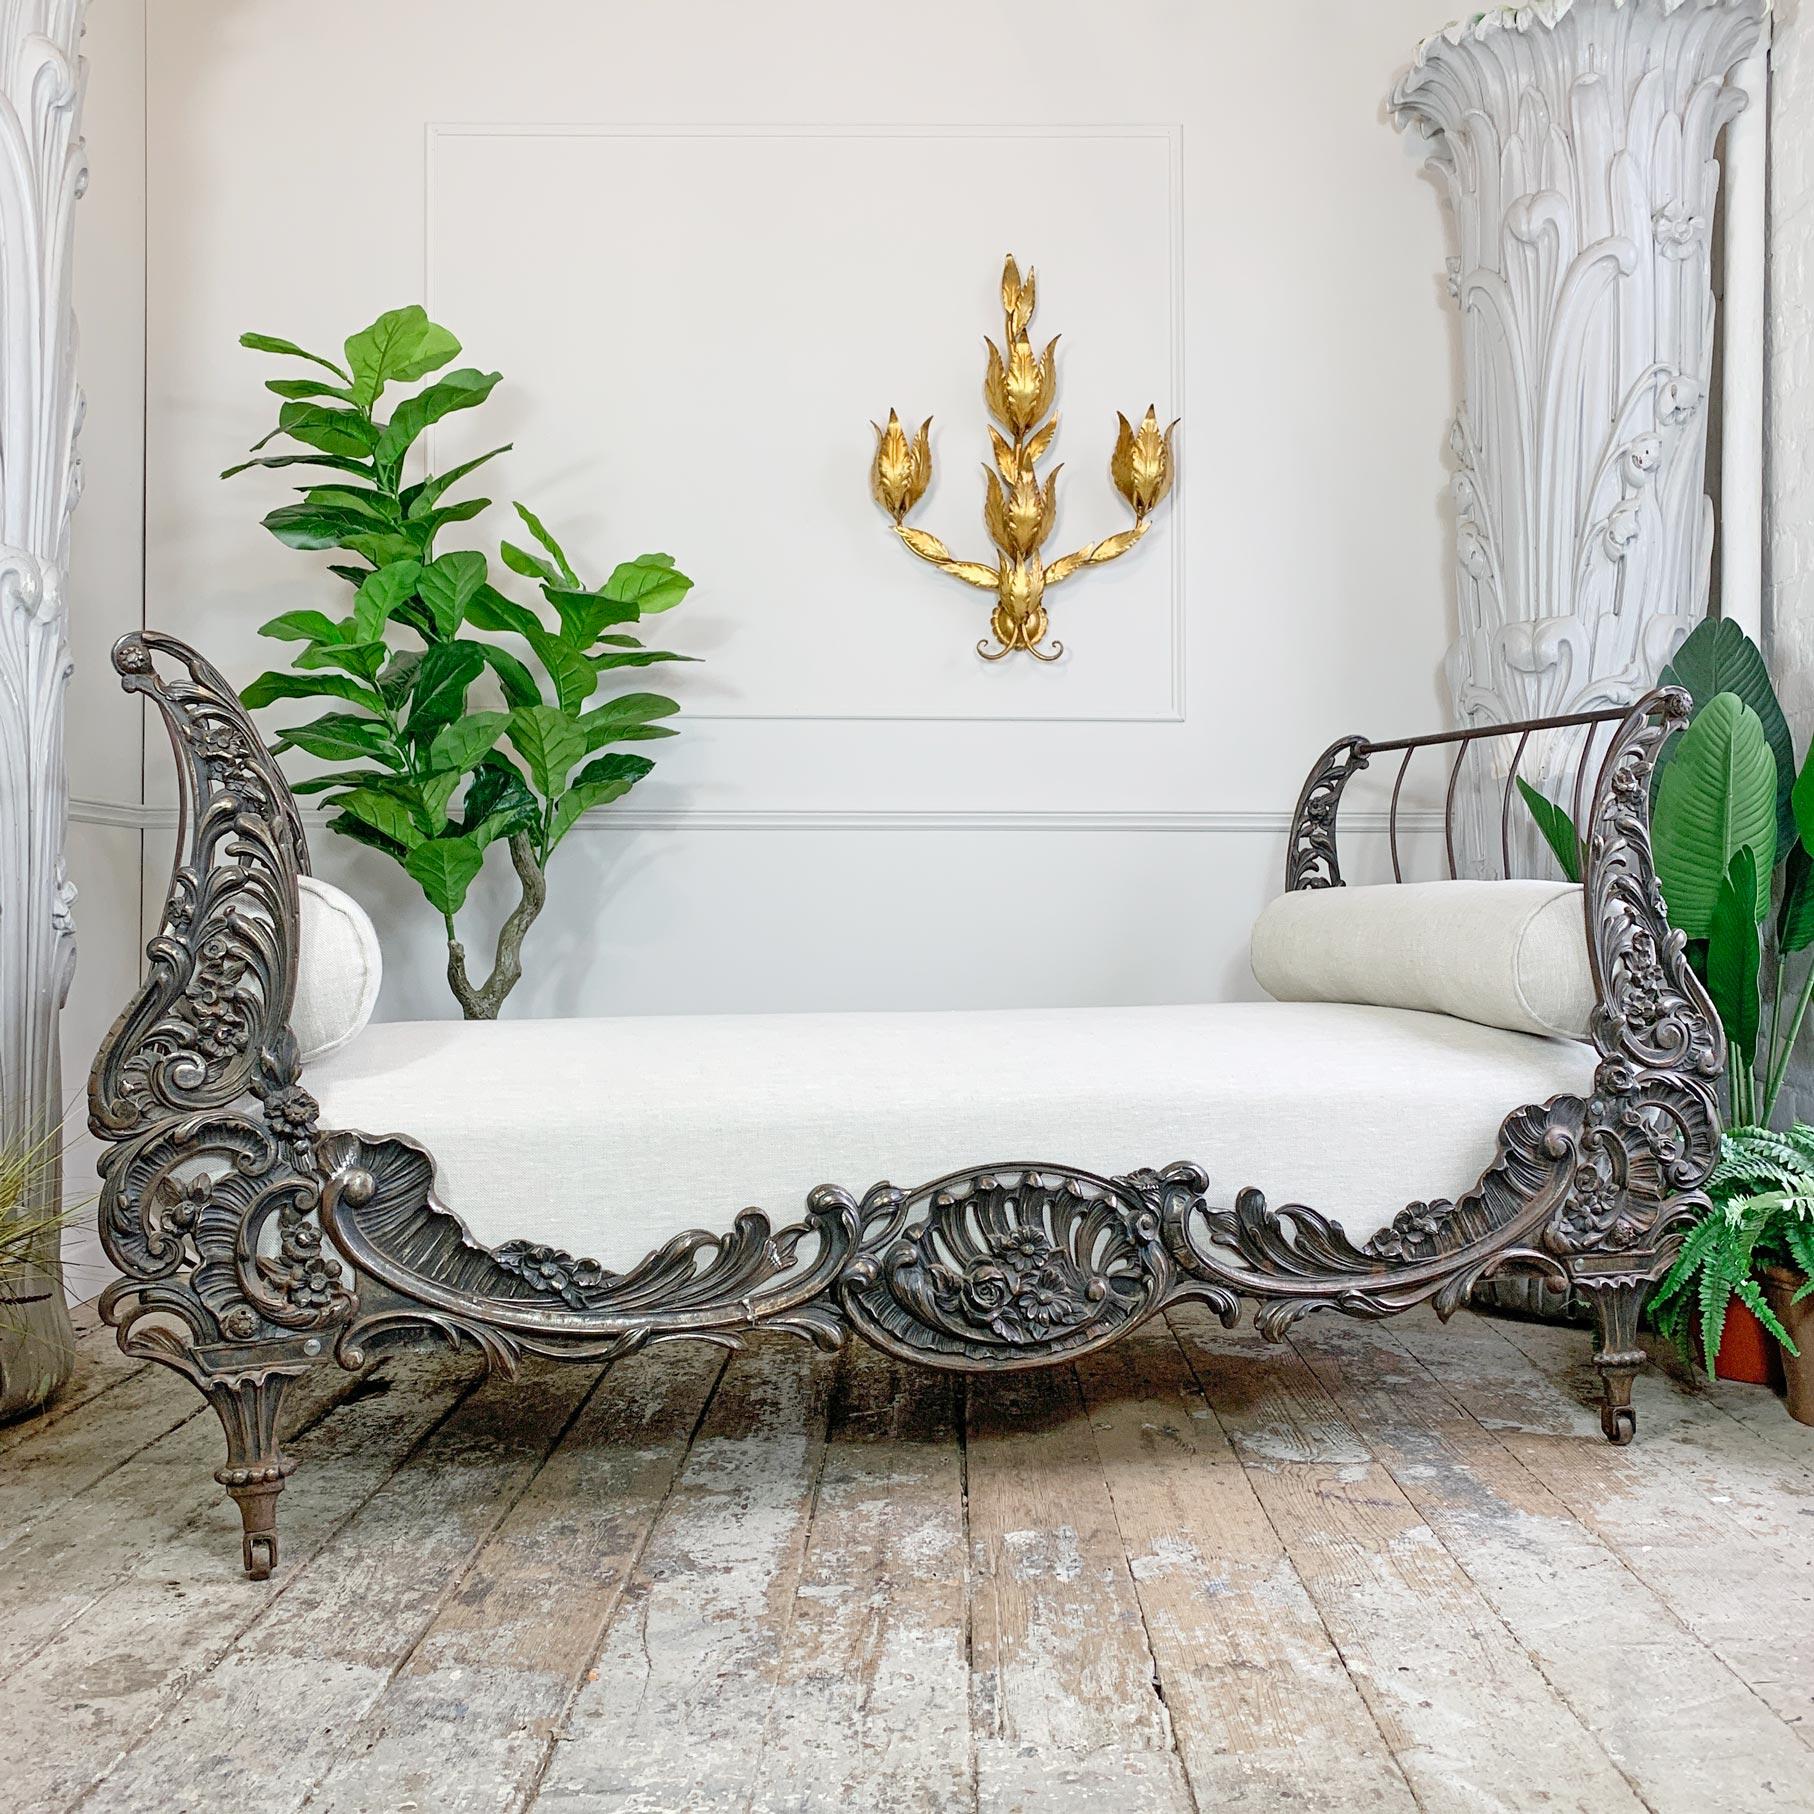 An absolutely gorgeous cast iron day bed, made in France circa 1890, the deeply cast floral design with acanthus leaves and scrolls, it exudes early French Nouveau influences.

The wooden framed cushioned bed base has been fully re-upholstered in a